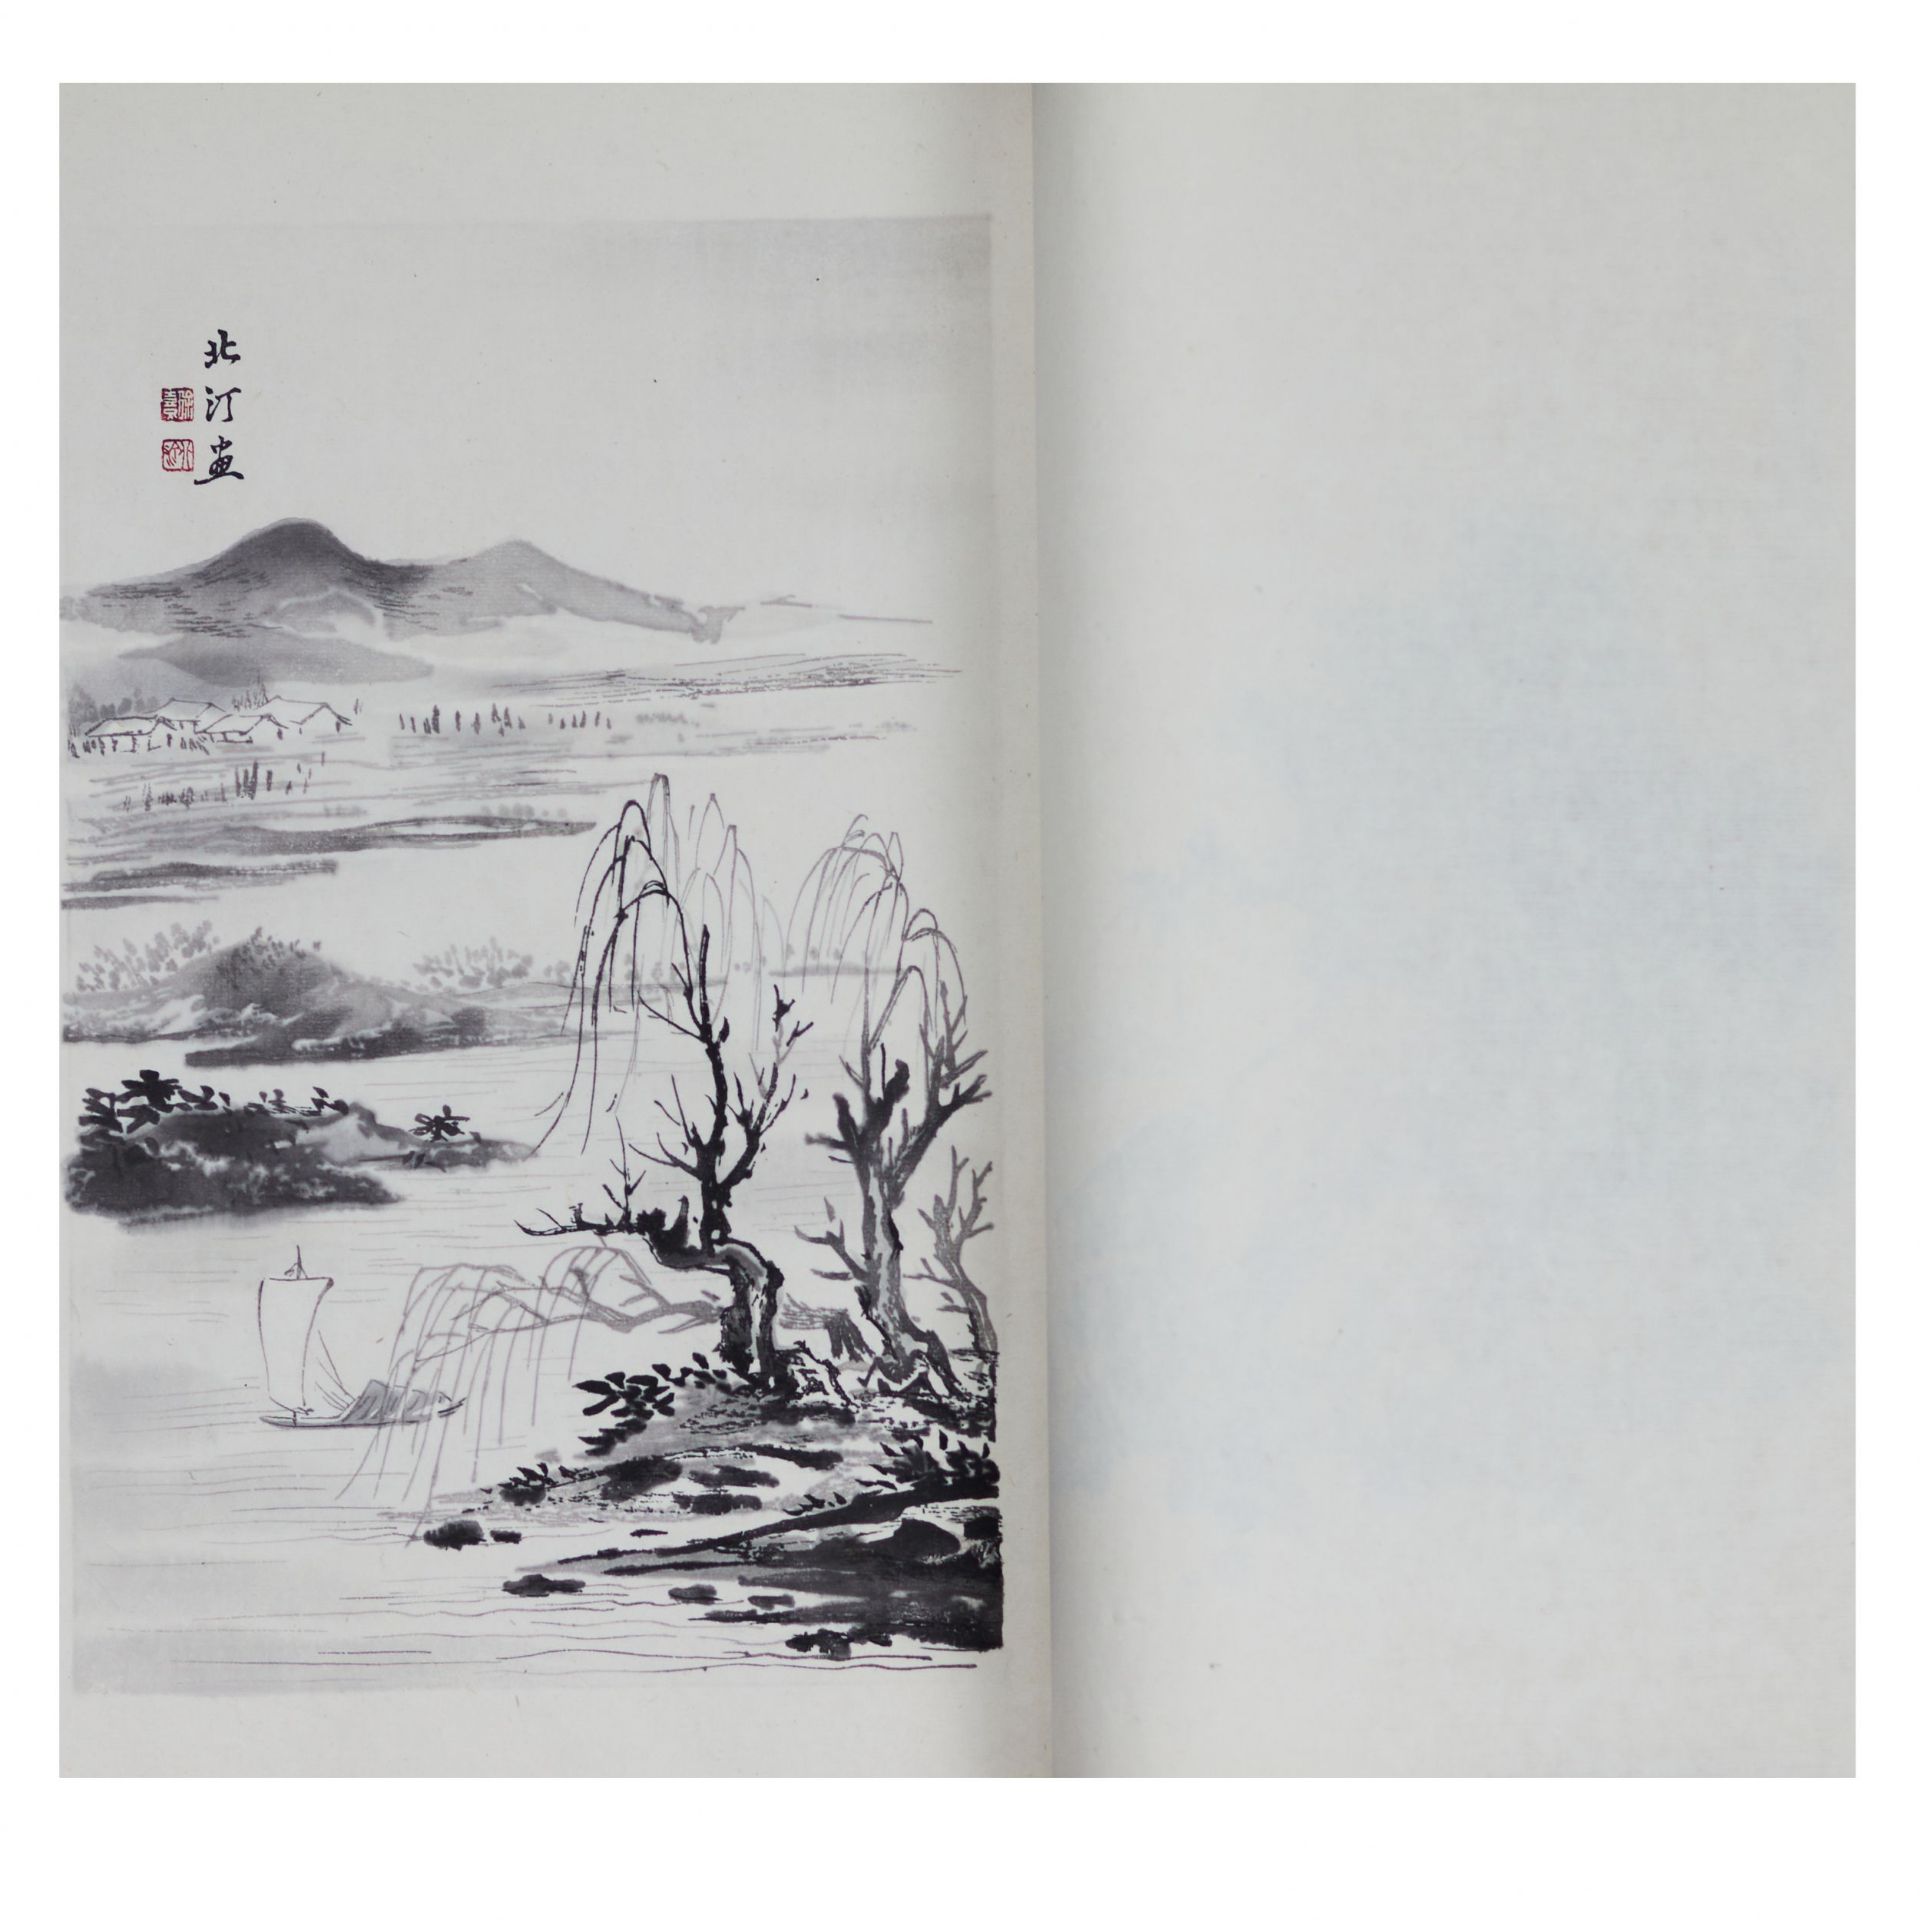 Collection of Chinese paintings by Guo-Hua, edited by Guo Mozhuo. China. 20th century. - Bild 5 aus 14